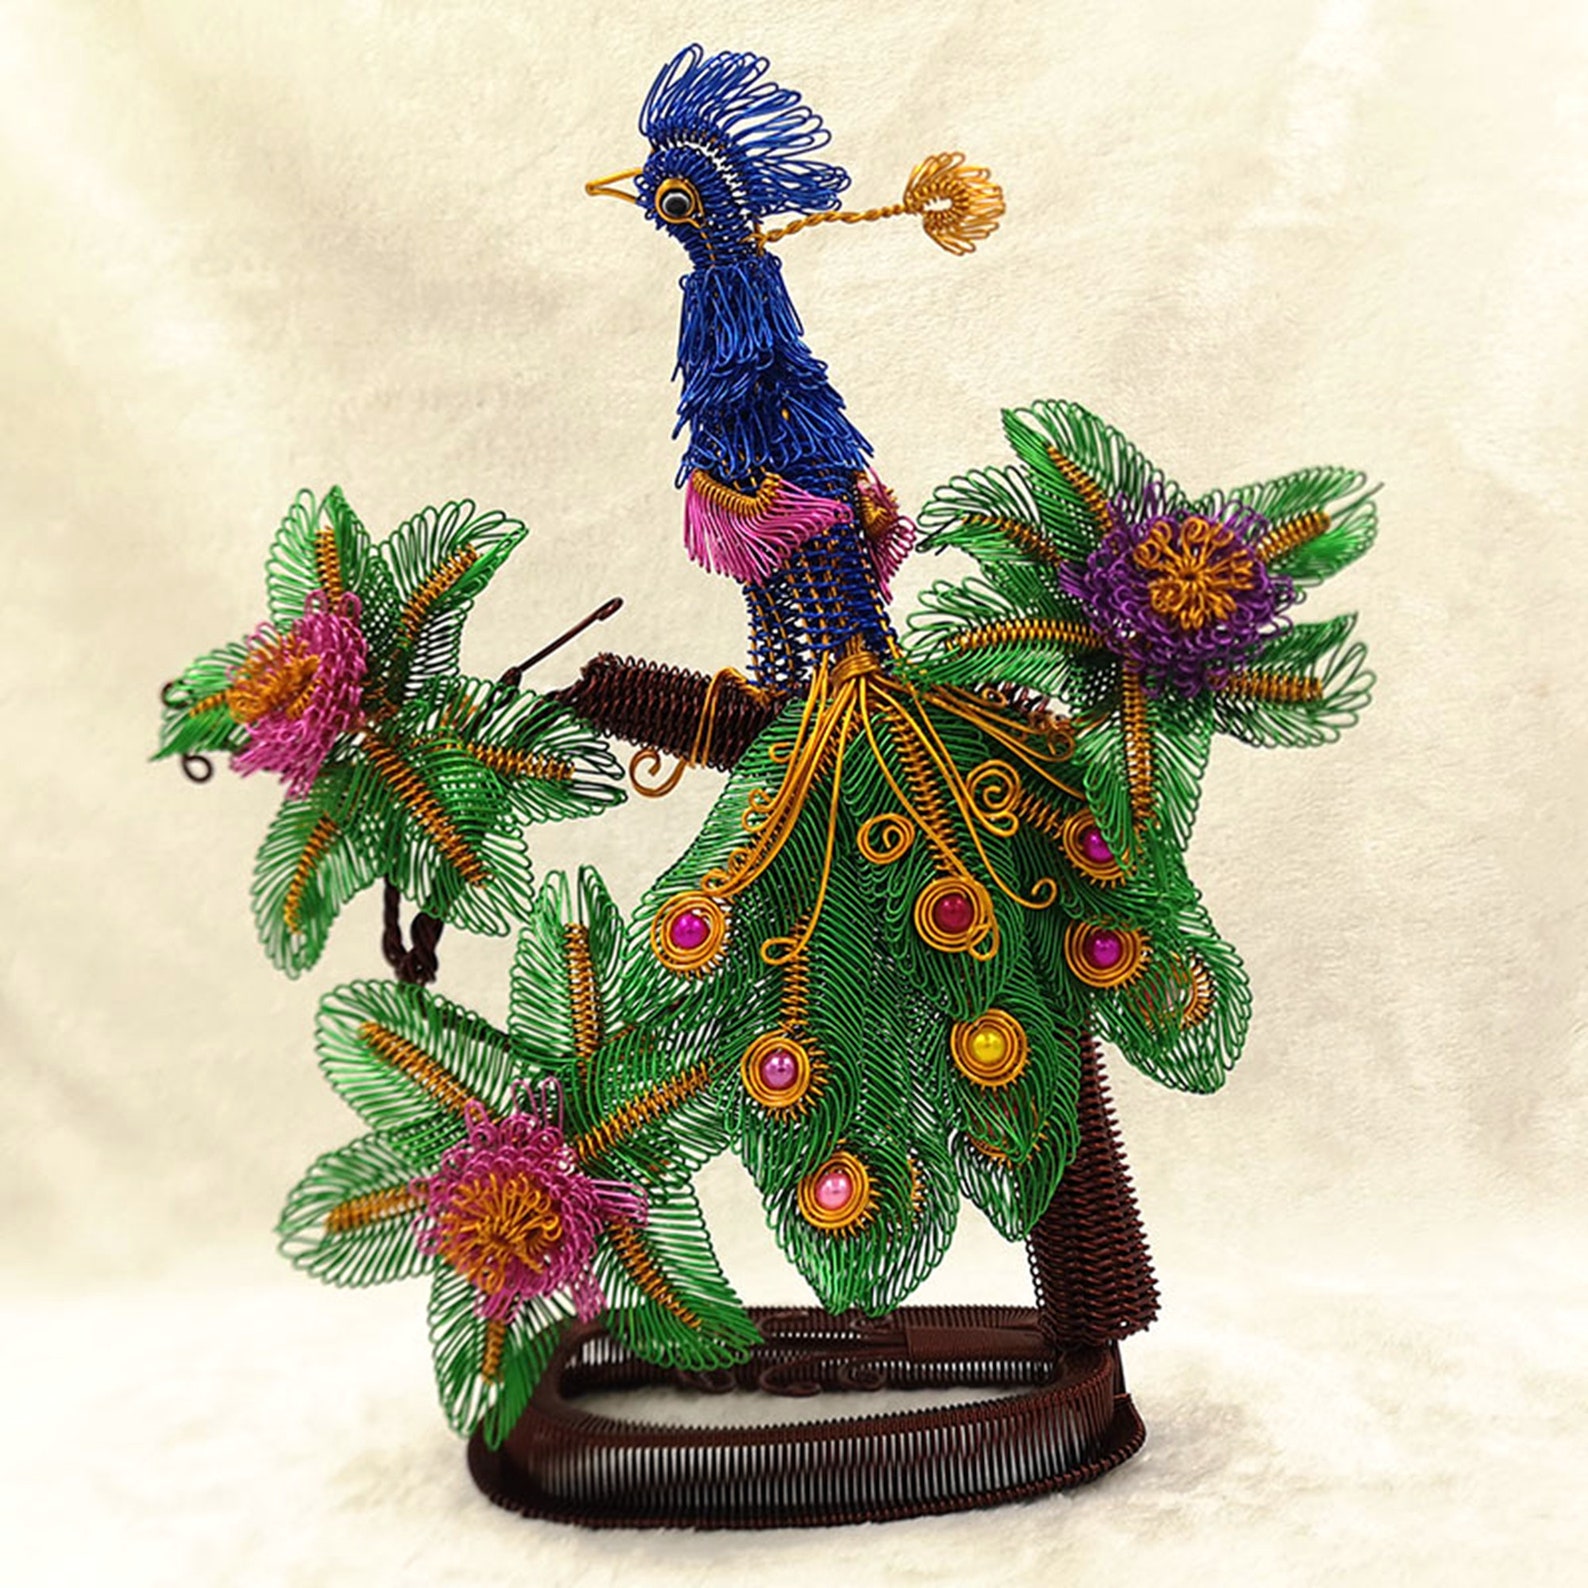 Hand Woven Peacock Bird Statue Ornament Wire Sculpture Tree | Etsy